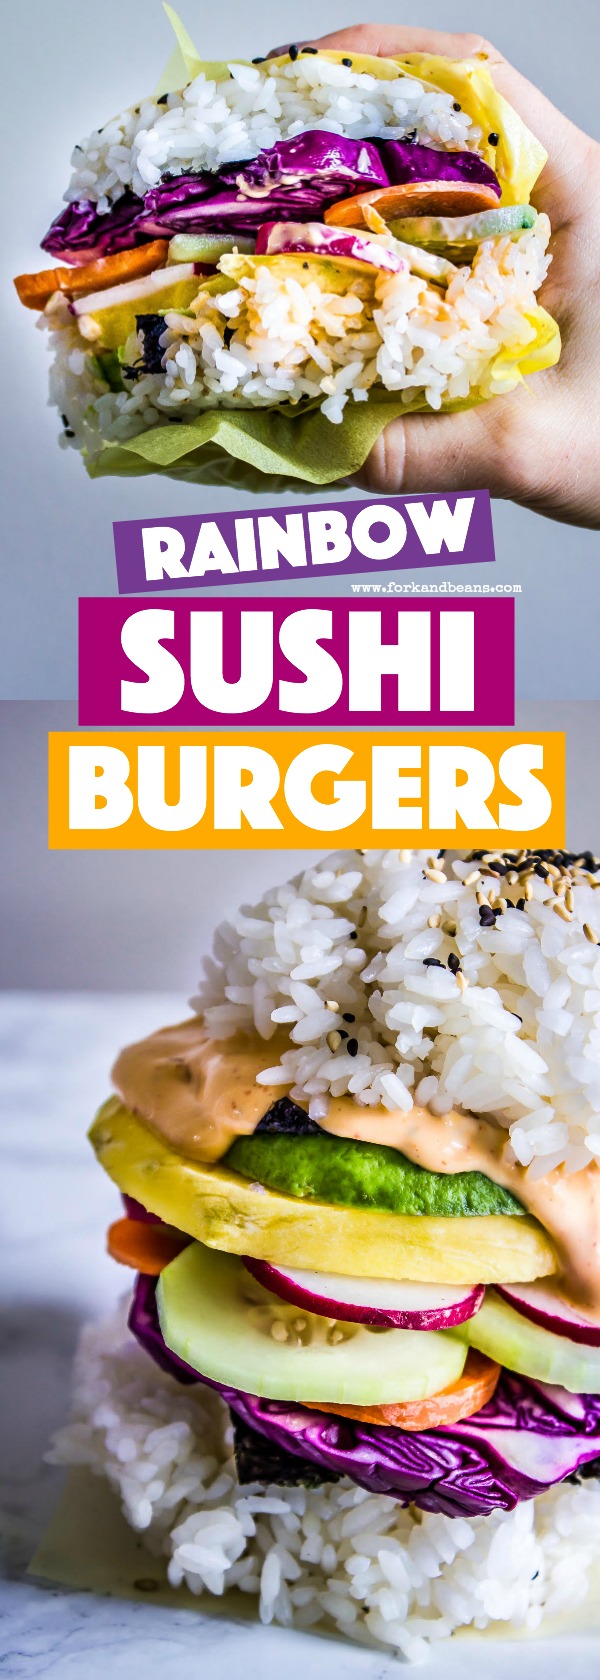 Get your kids involved with piling on the veggies on these Rainbow Sushi Burgers for a perfect meatless meal that all can participate in making & will love! #veganrecipes #kidfood #sushi #dinner